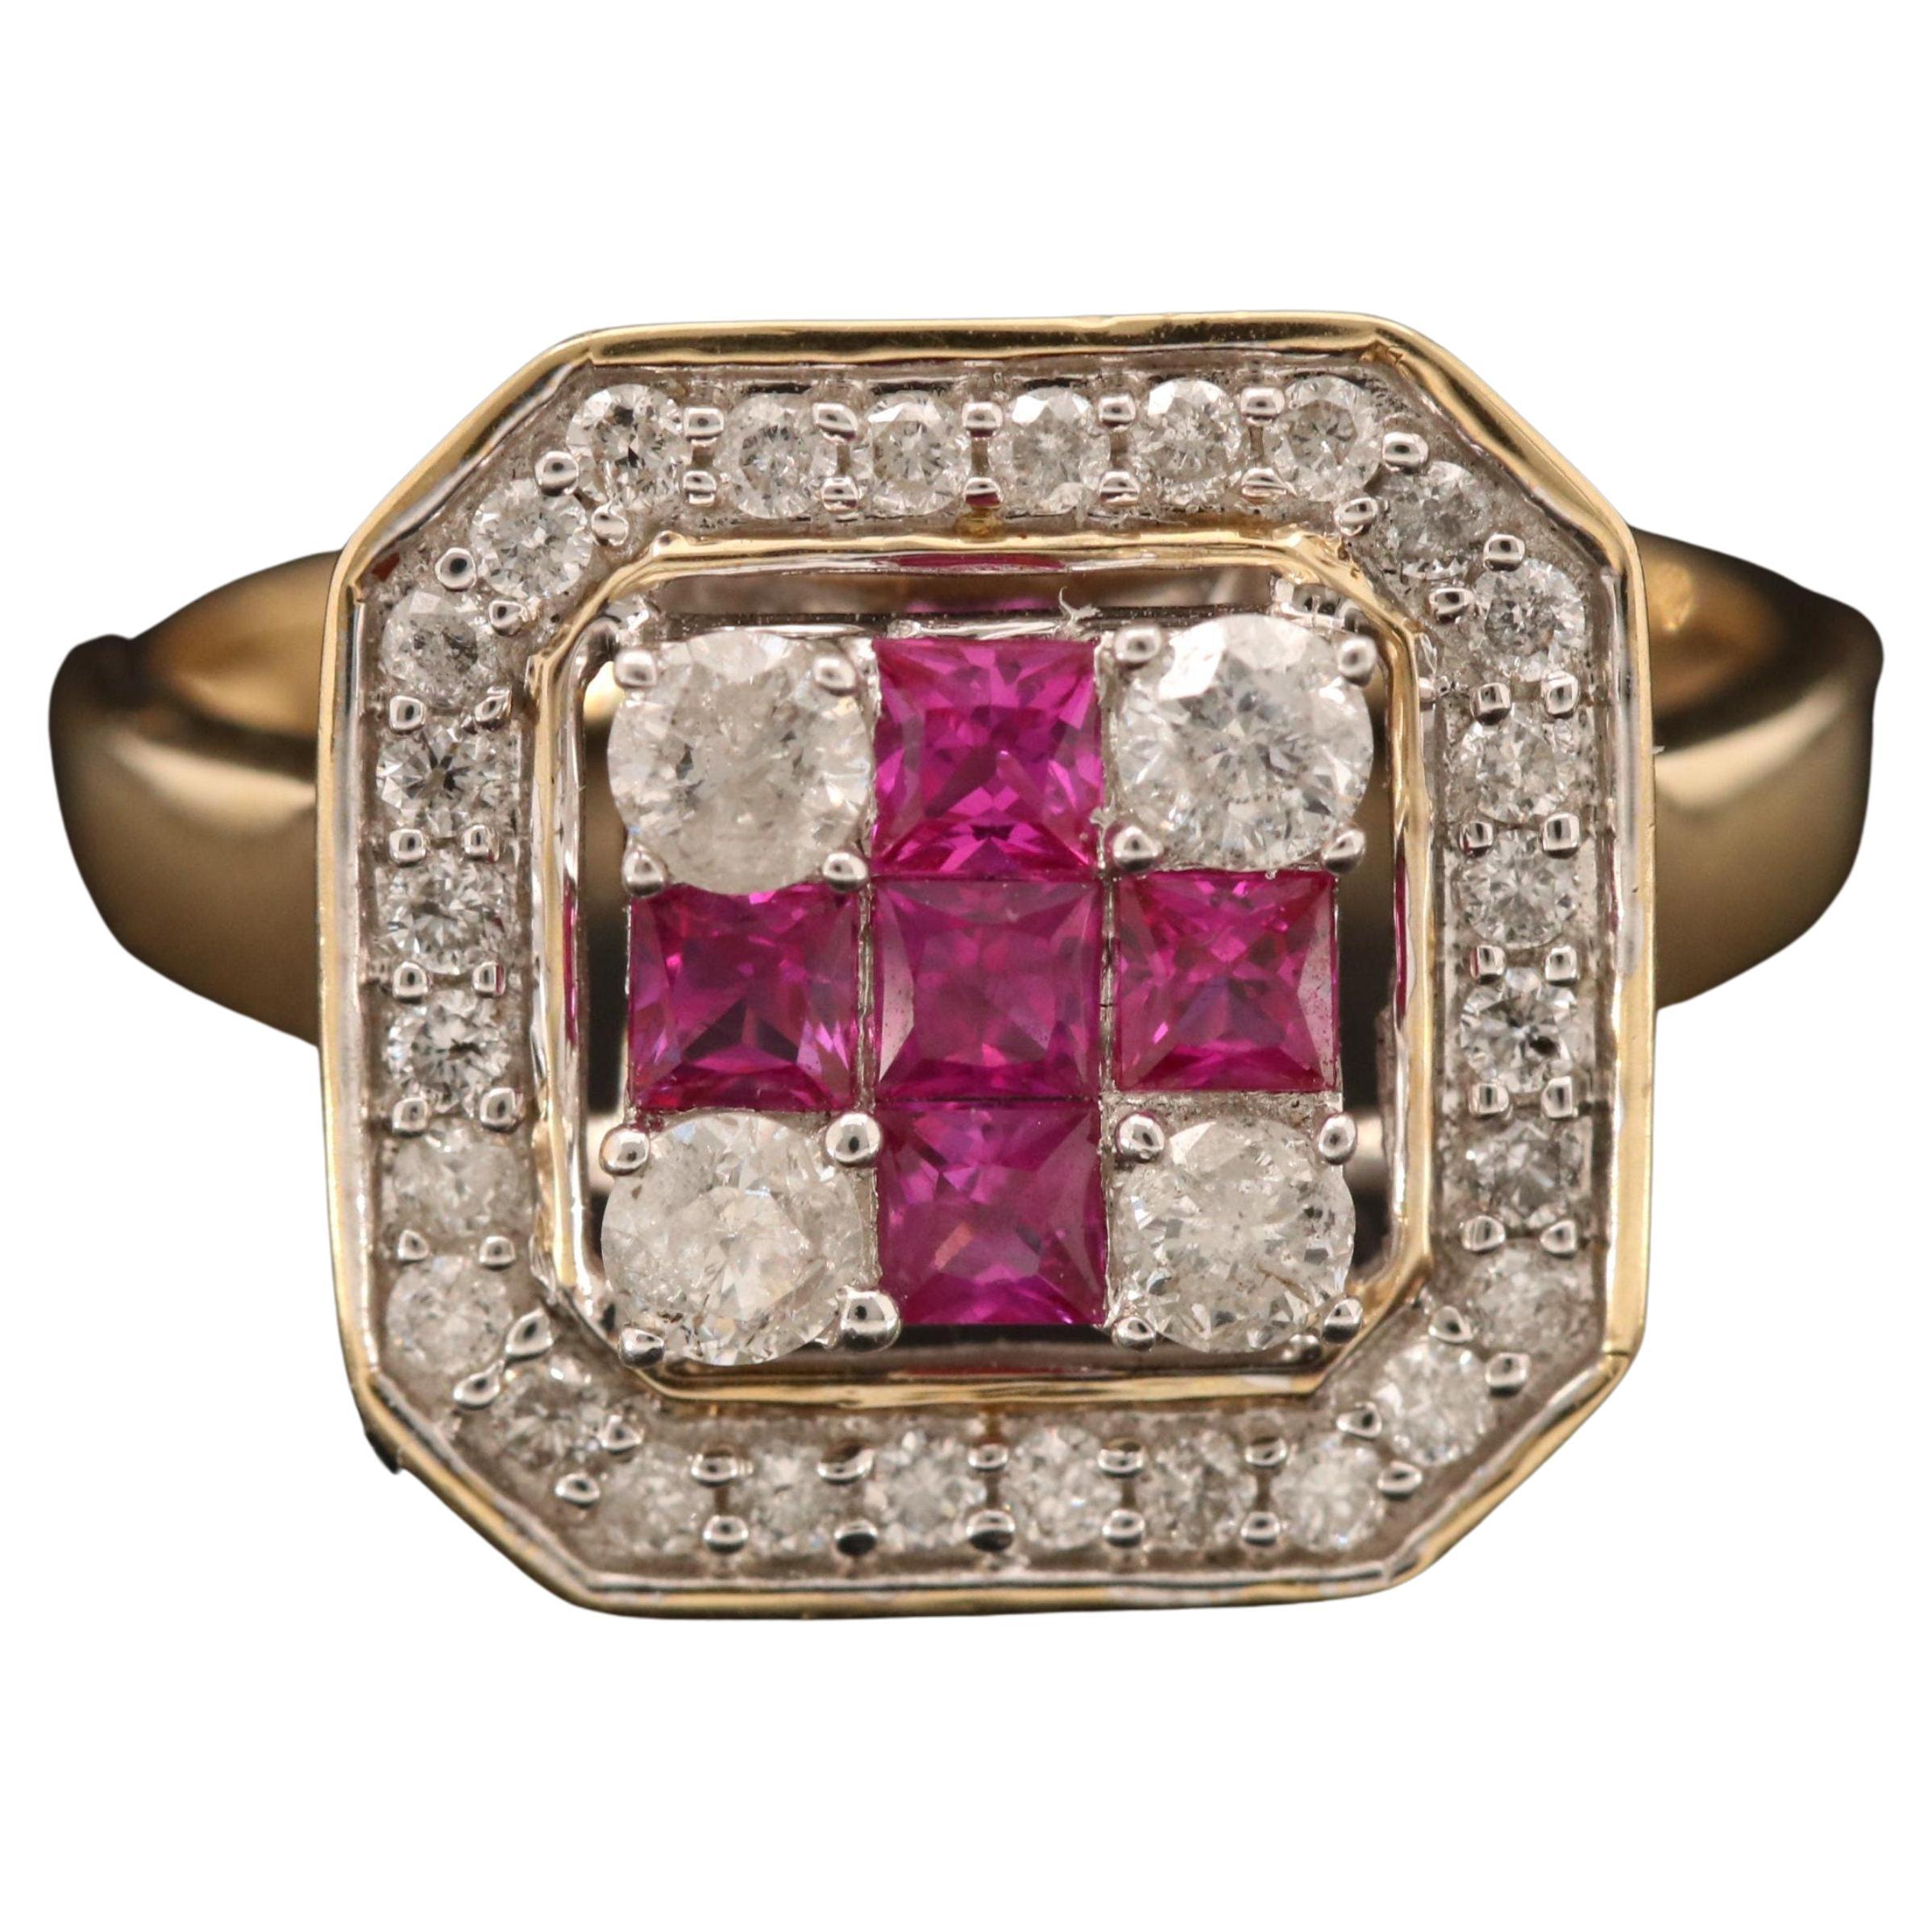 For Sale:  Vintage Art Deco Ruby Diamond Engagement Ring, Victorian Halo Ruby Cluster Ring